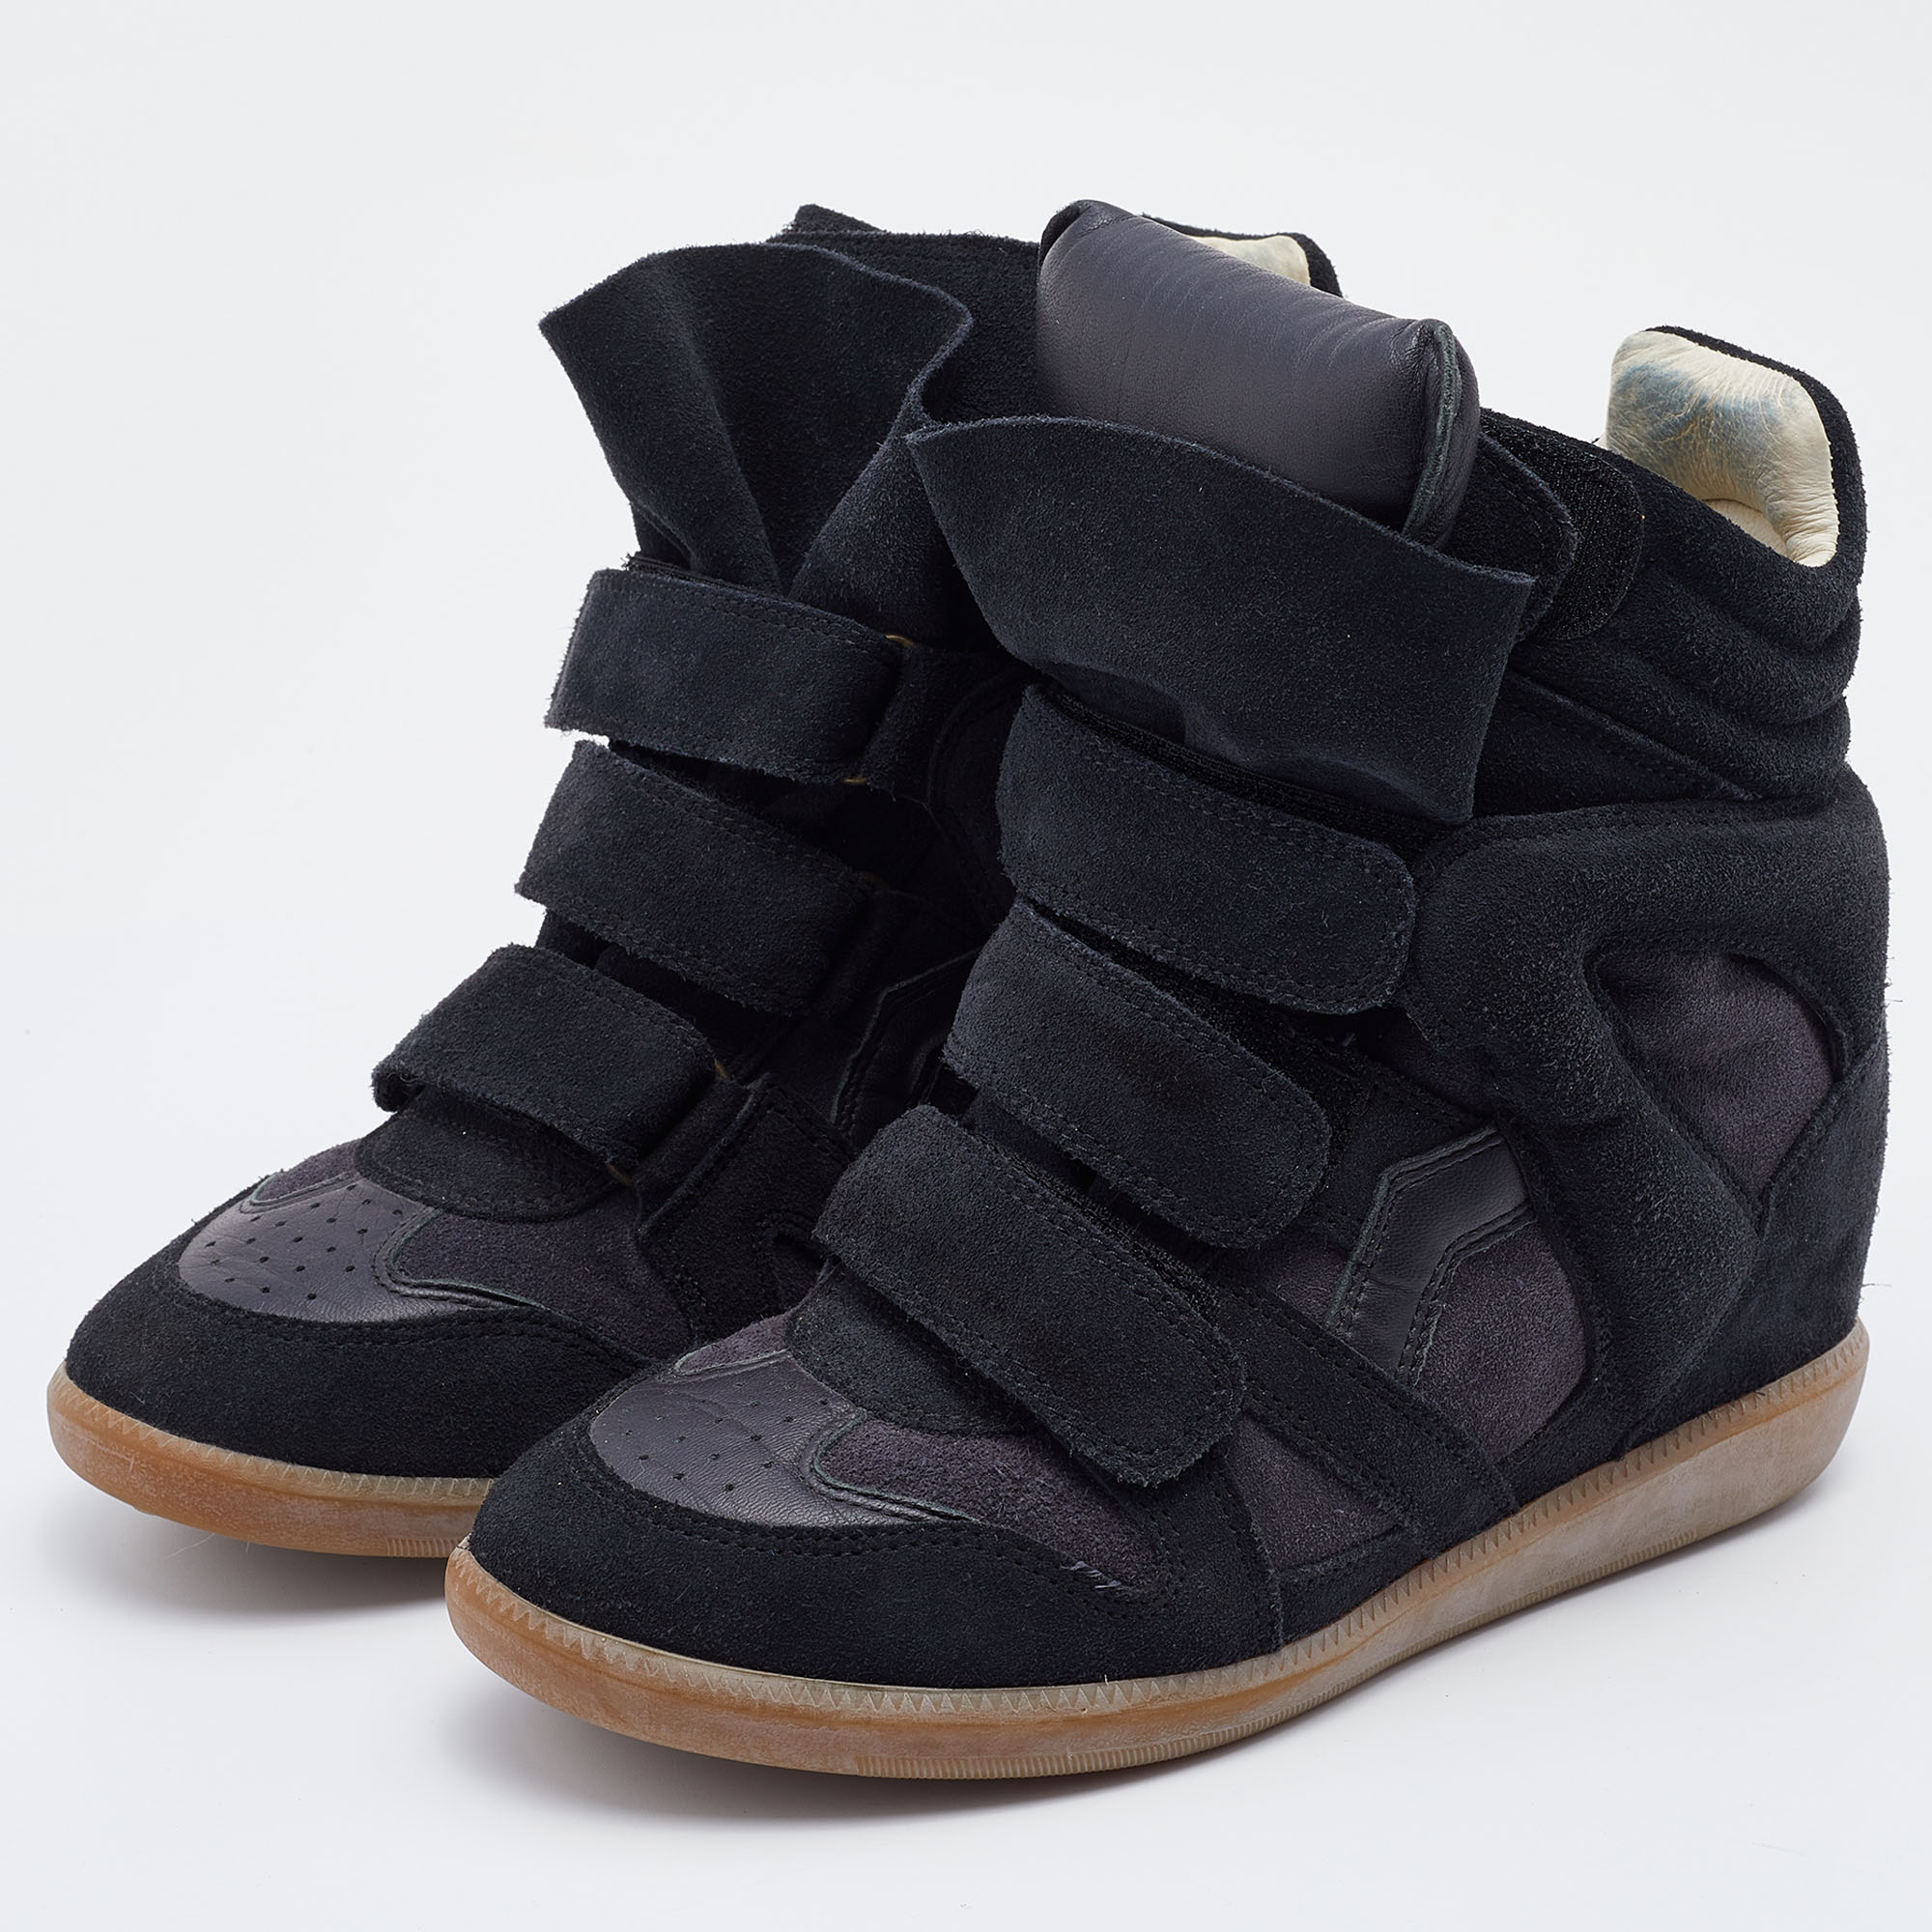 

Isabel Marant Black/Grey Suede And Leather Beckett Wedge Sneakers Size